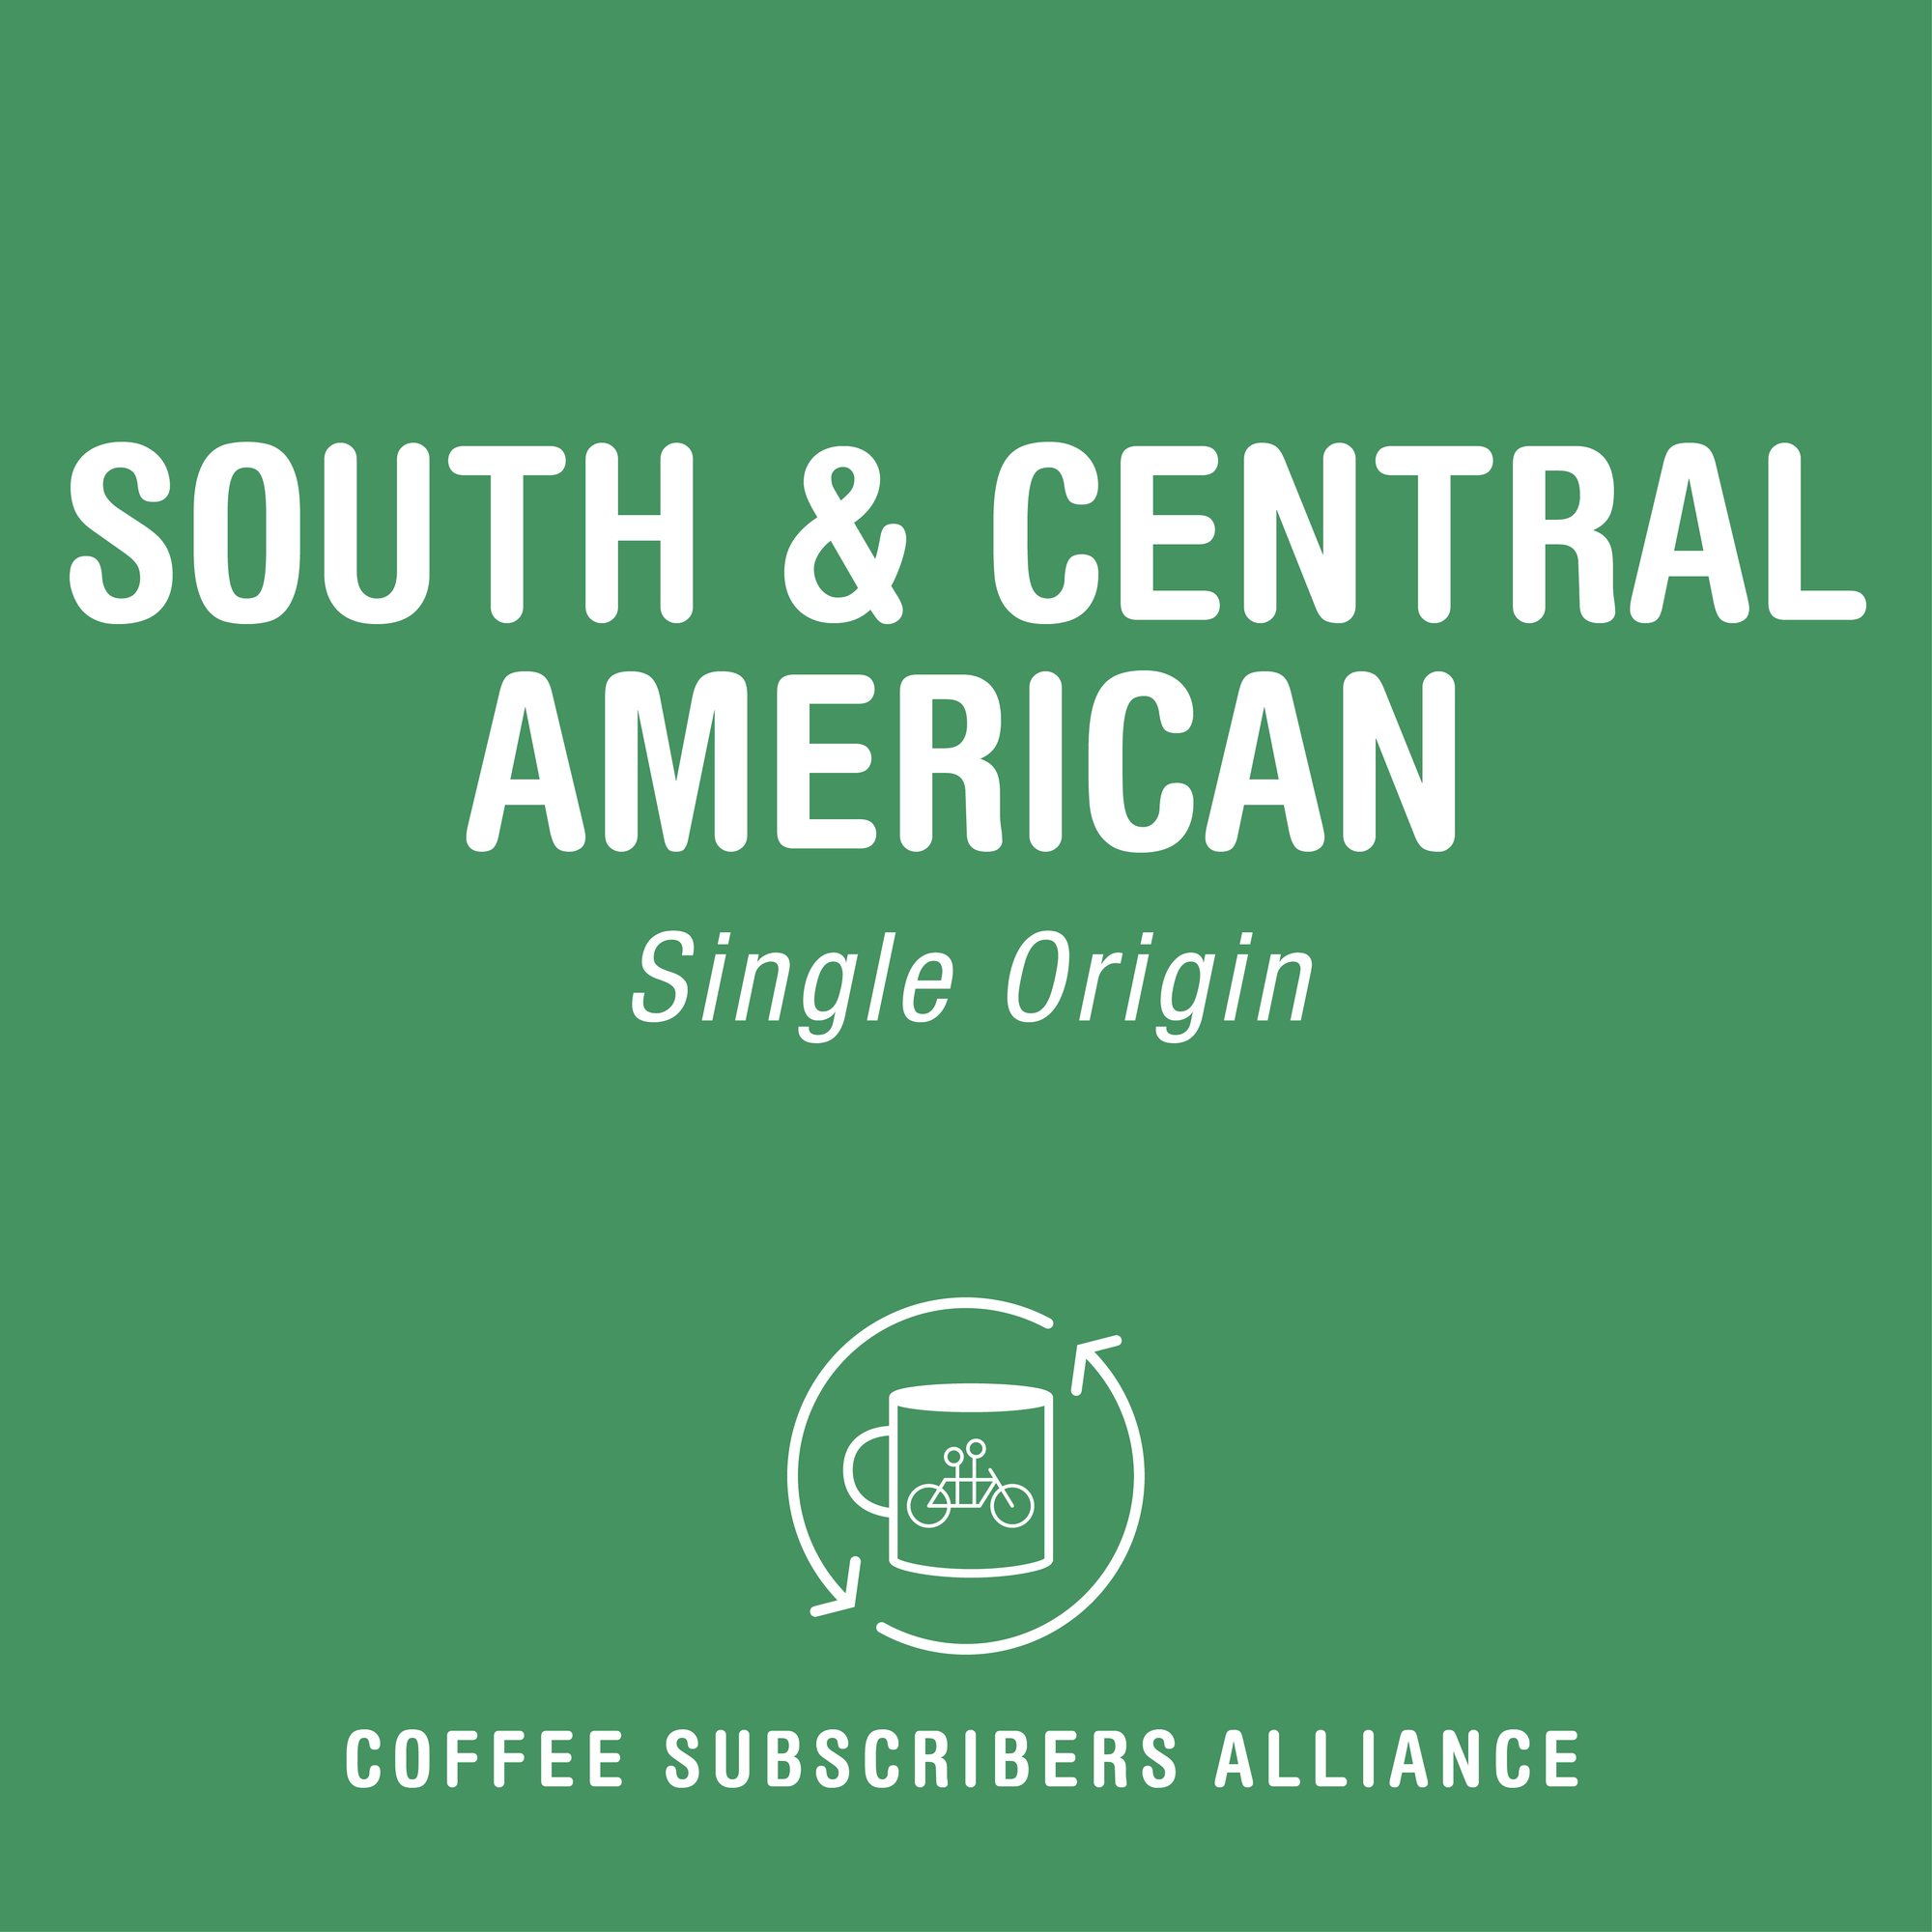 A graphic promoting Tandem Coffee Roasters' "South & Central American Subscription Gift - 1 Week x 3" coffee, featuring an emblem with a coffee cup and a bicycle, titled "coffee subscribers alliance" on a green background.